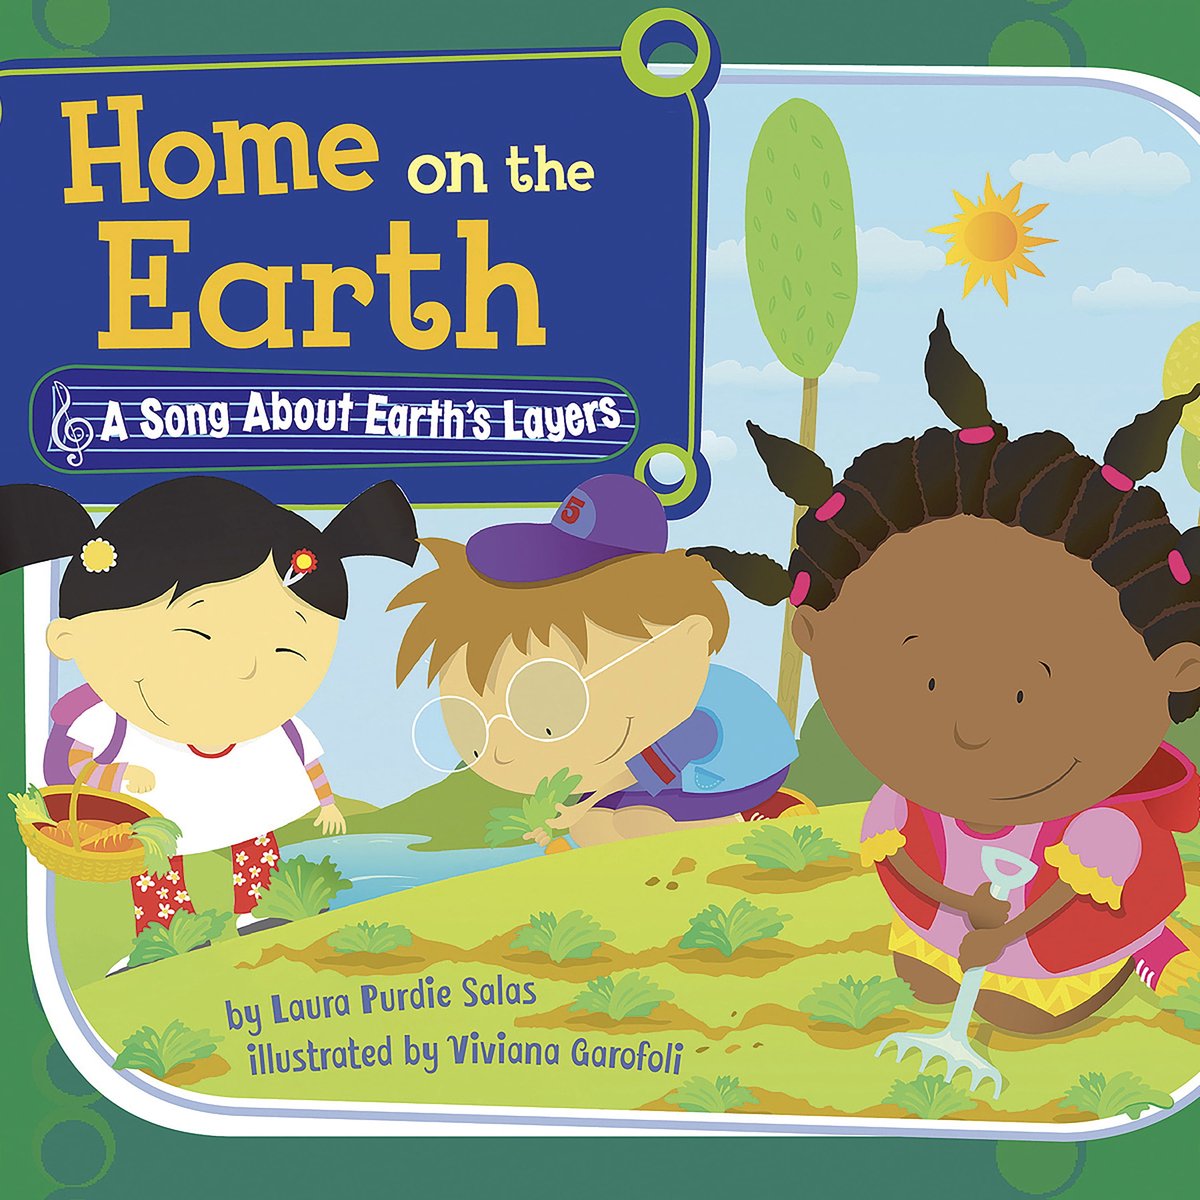 Home on the Earth - Laura Purdie Salas